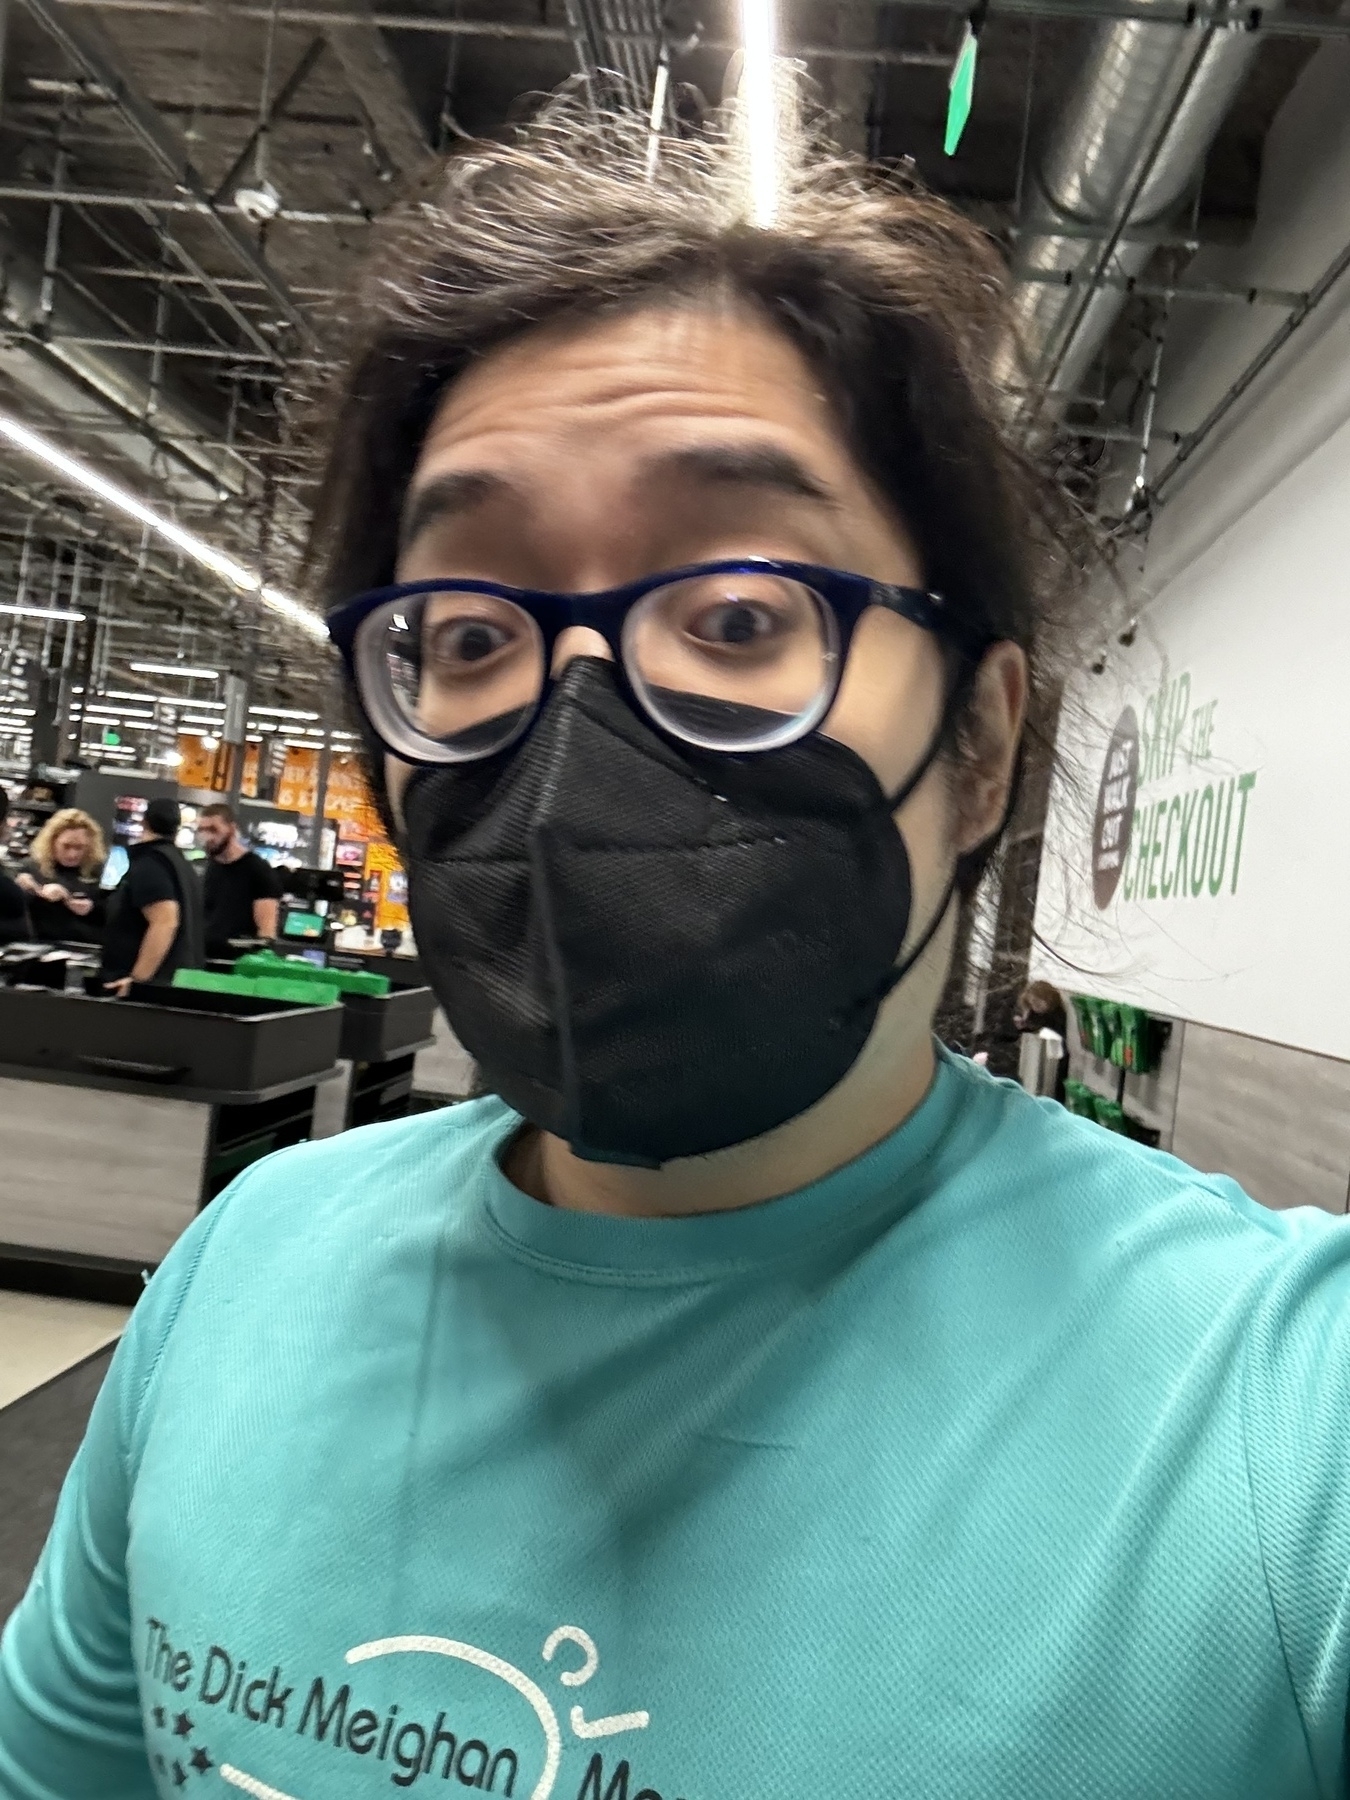 Miguel a masc Filipino man with black hair and a black mask inside an Amazon fresh grocery store. Wearing a teal long sleeve shirt. 